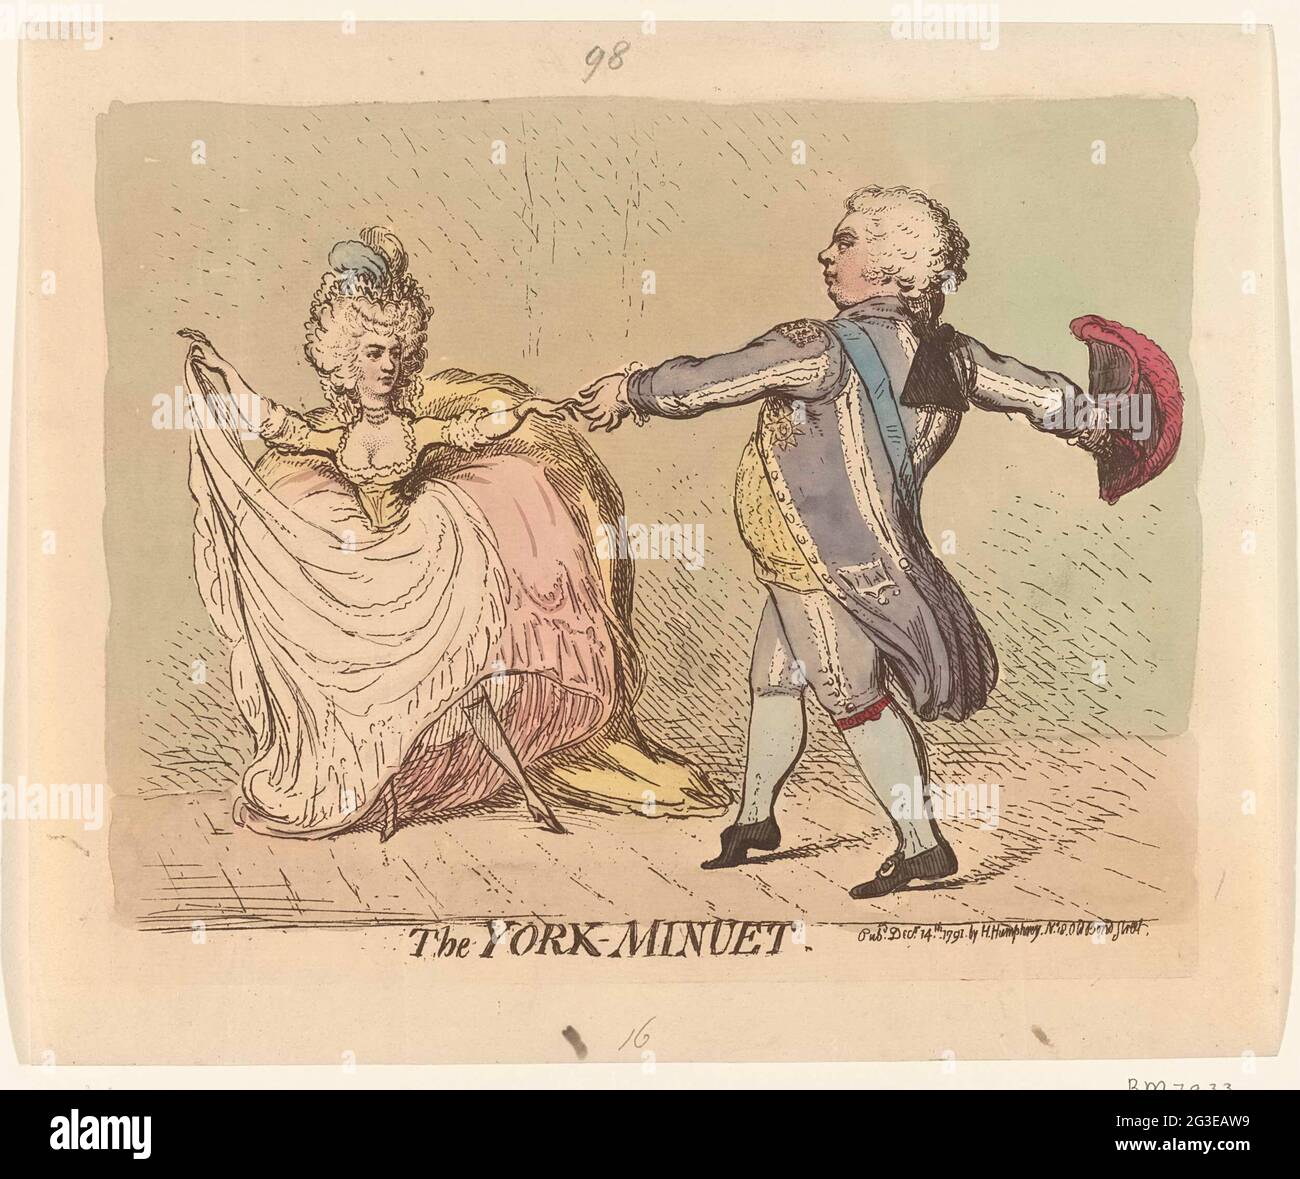 Duchess of York and the Prince of Wales Dancing a Menuet, 1791; The York Minuet. Cartoon in which the Duchess of York and the Prince of Wales together dance a menuet, 1791. Stock Photo